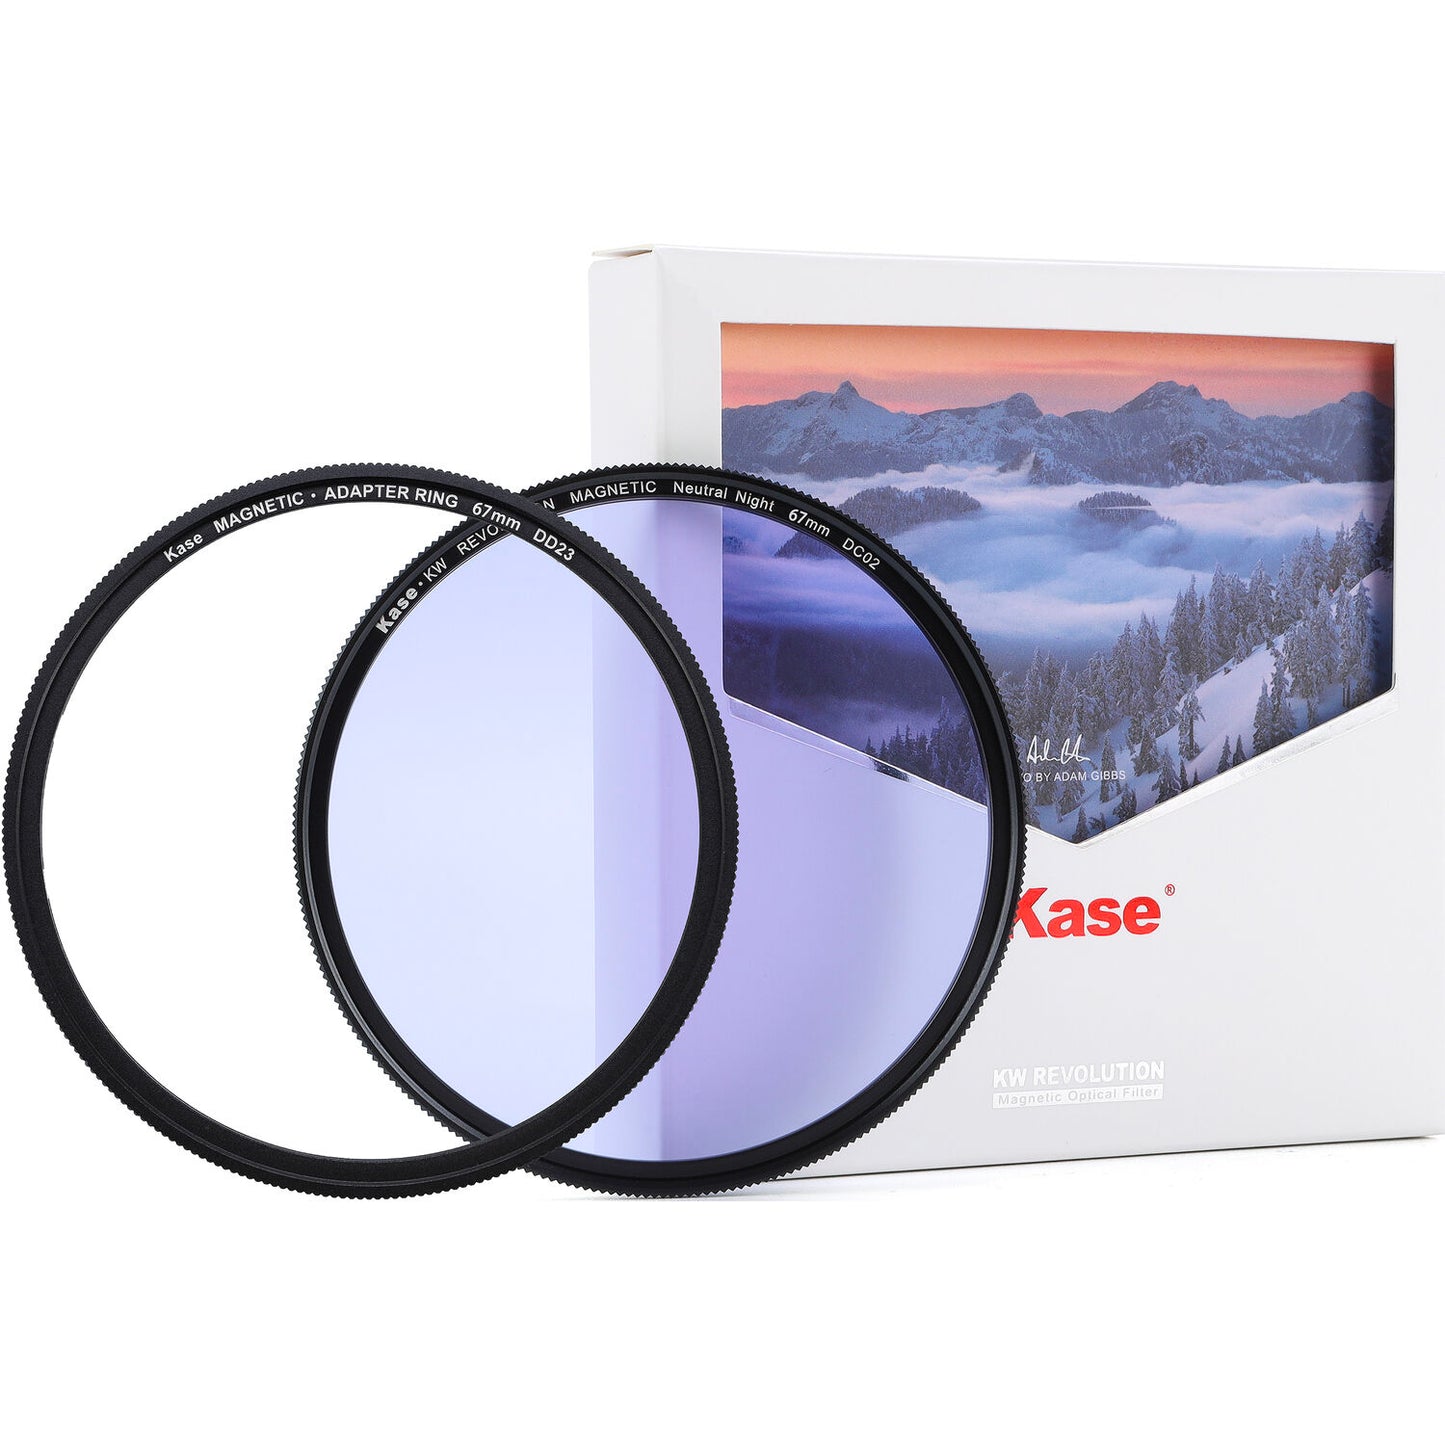 Kase KW Revolution Neutral Night Pollution Filter with Magnetic Adapter Ring (67mm)